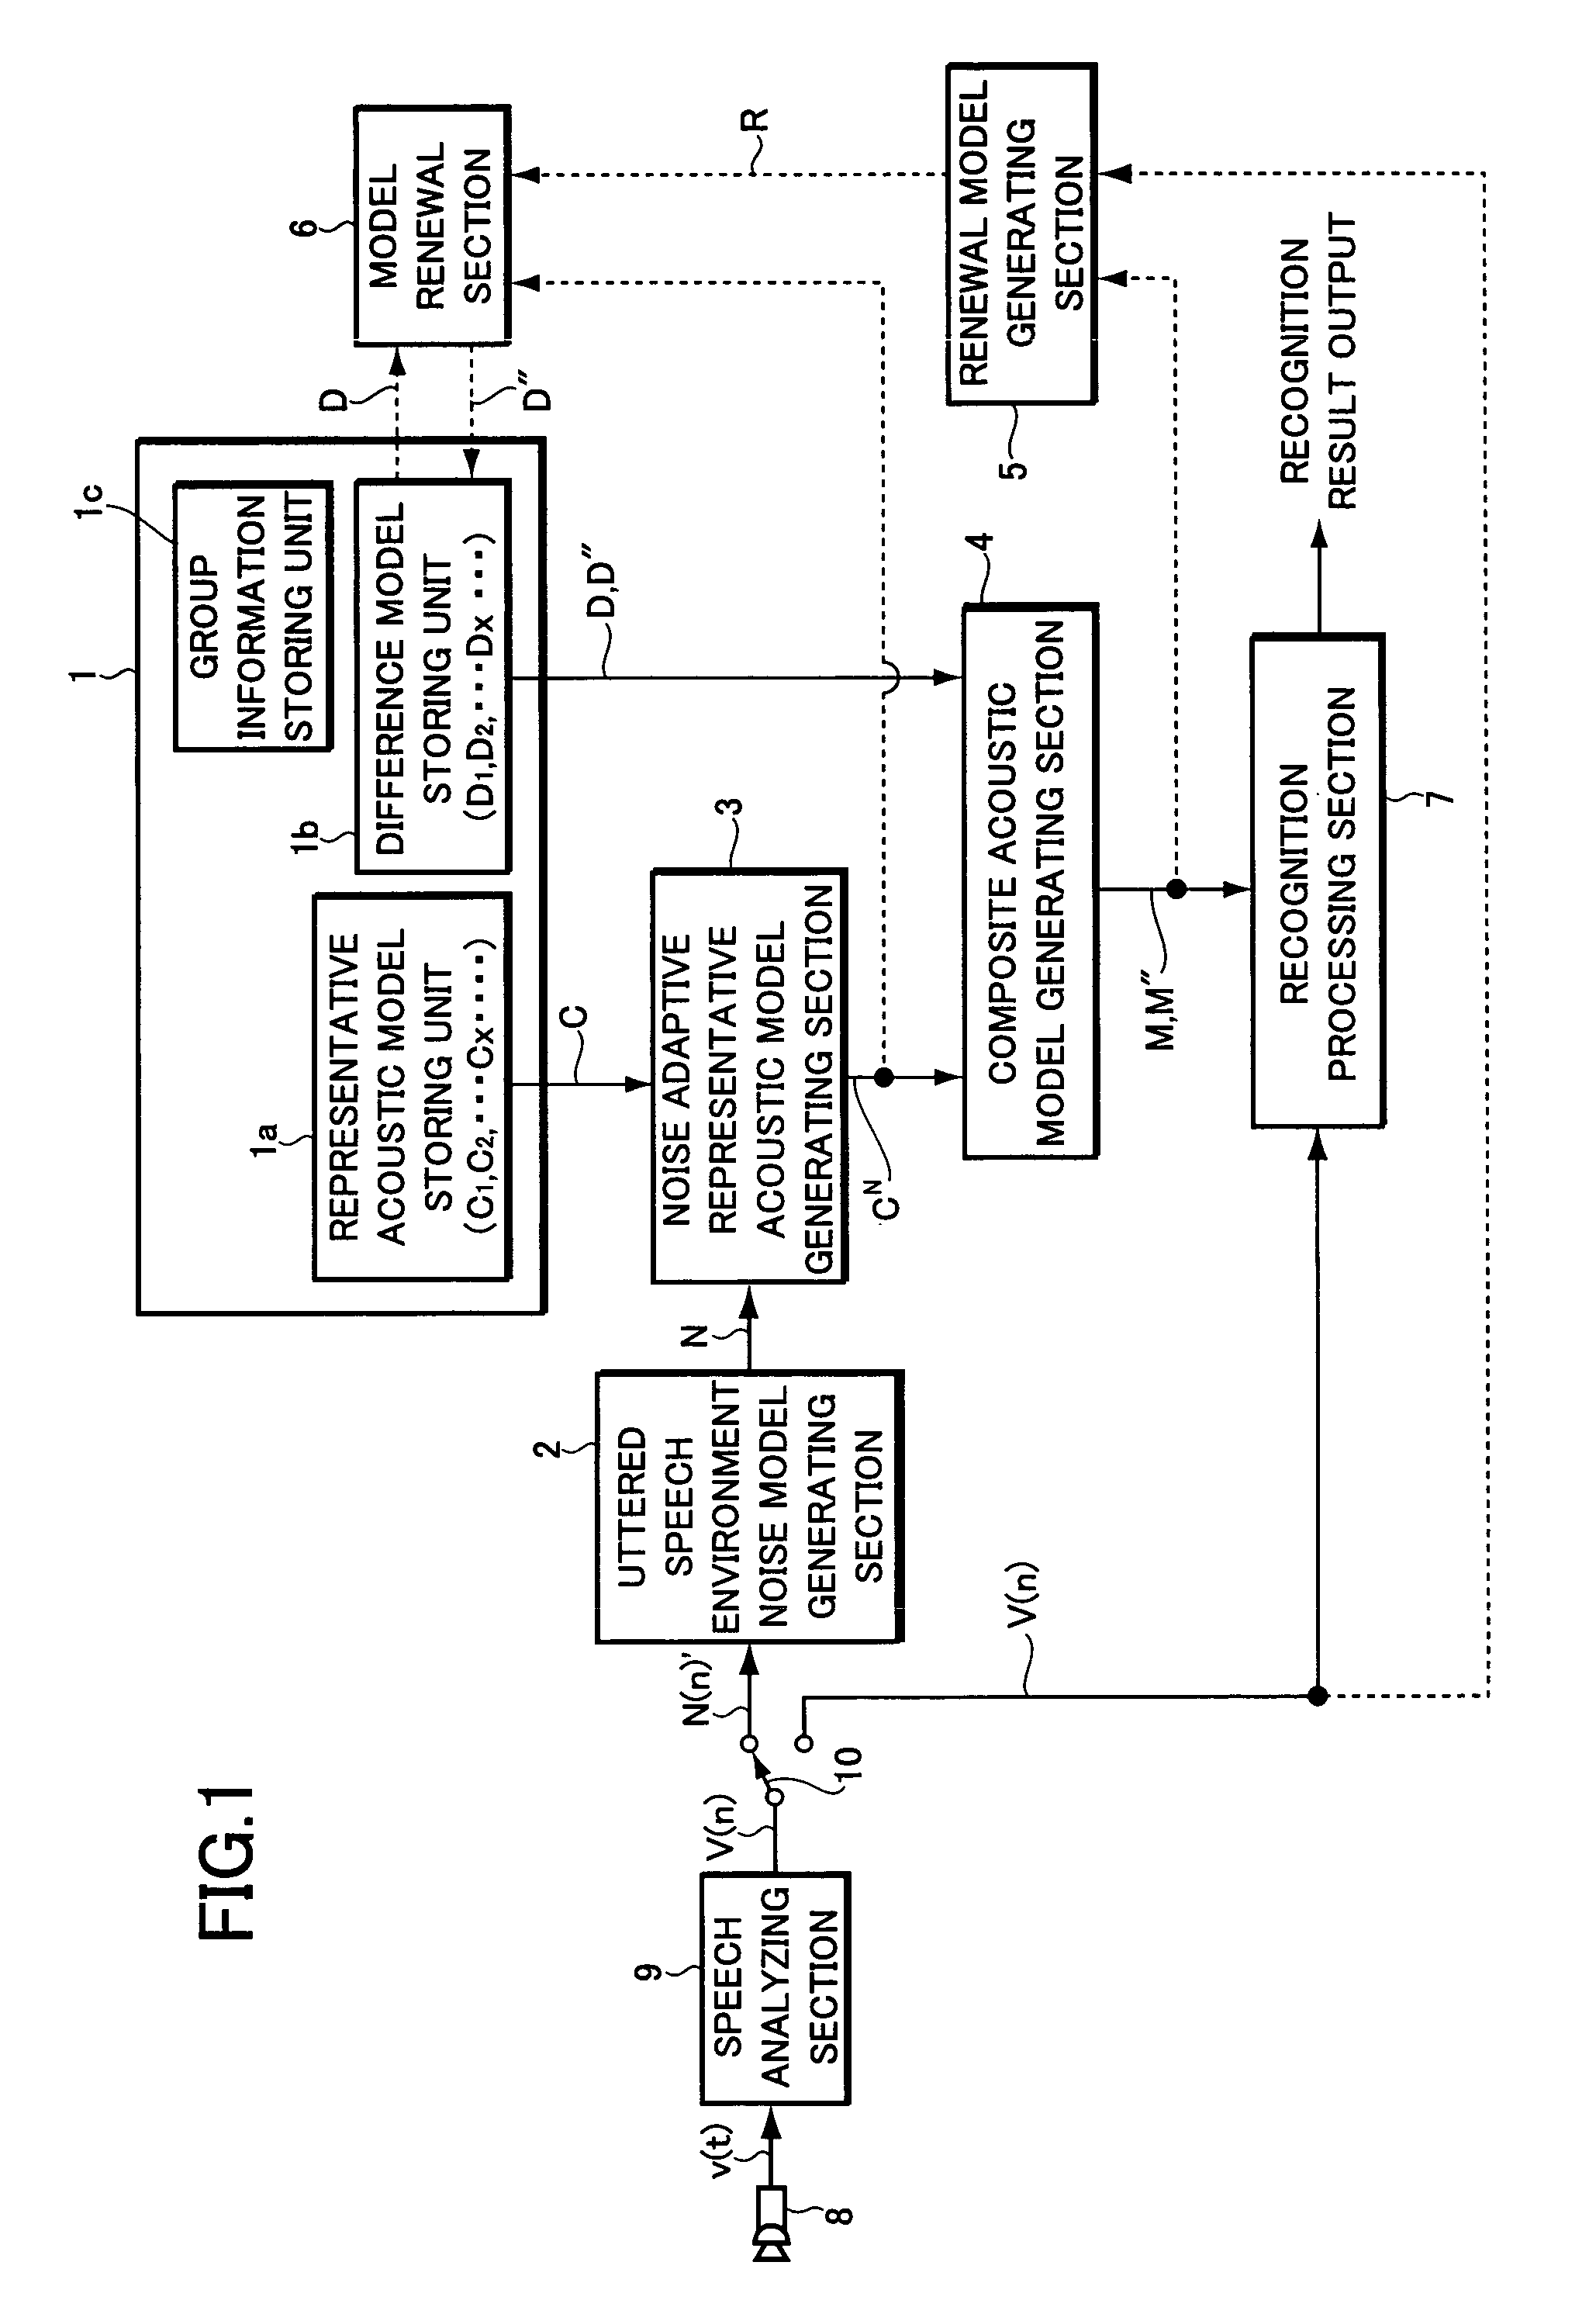 Apparatus and method for speech recognition